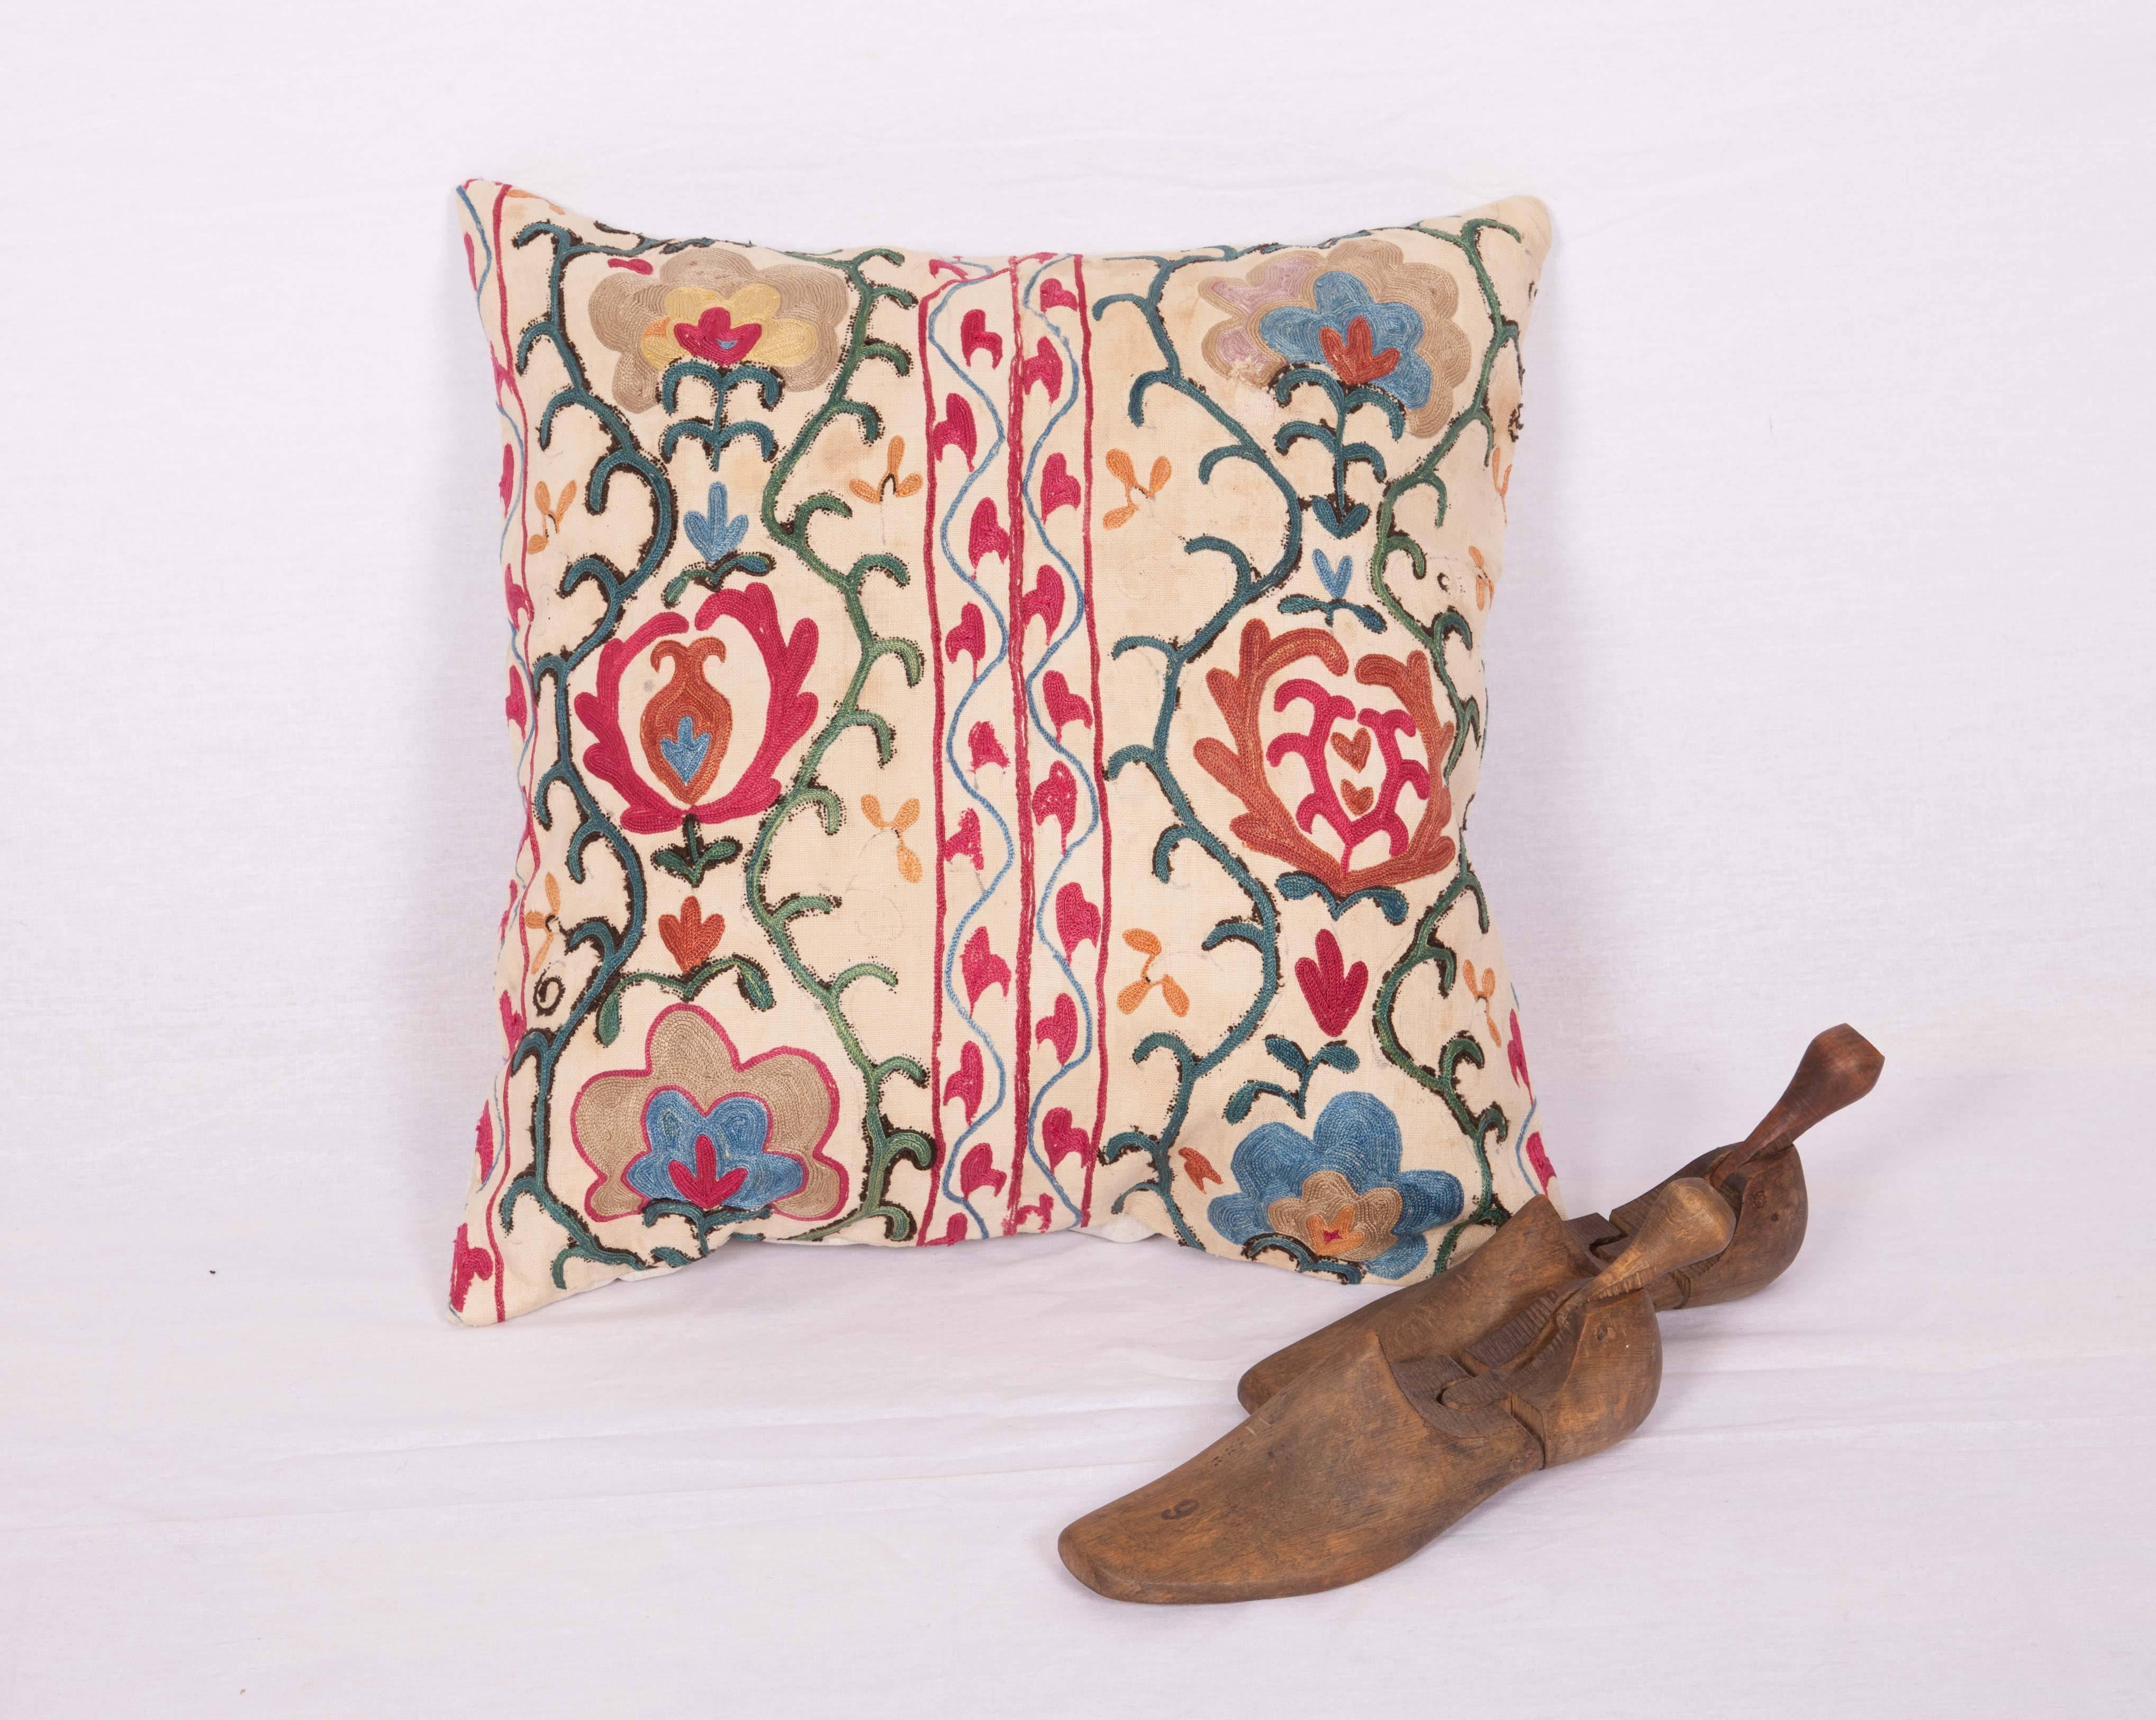 The pillow cases made from an antique Uzbek Suzani from Bukhara. It is silk embroidery on a handwoven cotton field. The backing is pure linen, and they do not come with inserts but bags made to the size in cotton to accommodate insert materials. Dry